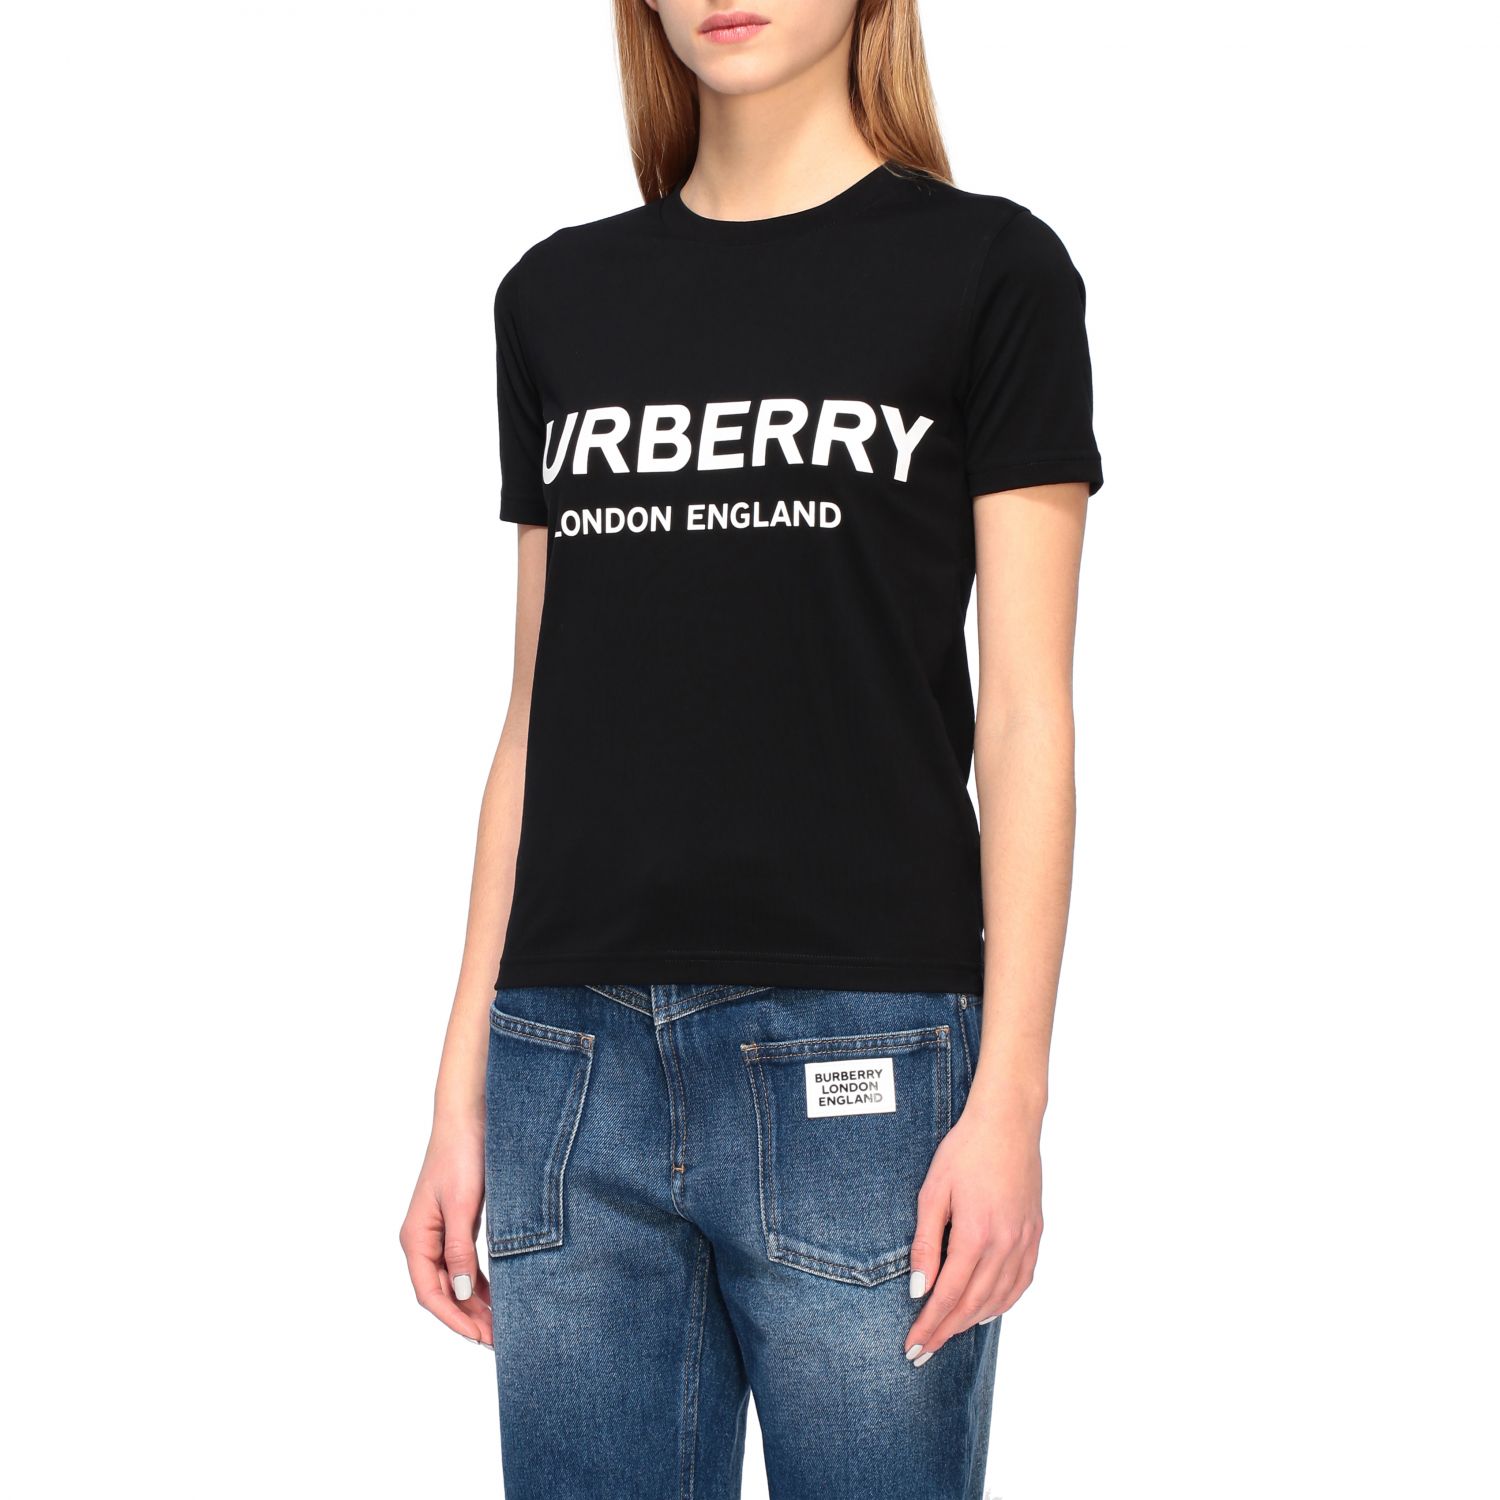 Burberry Outlet: t-shirt for women - Black | Burberry t-shirt 8011651  online on 